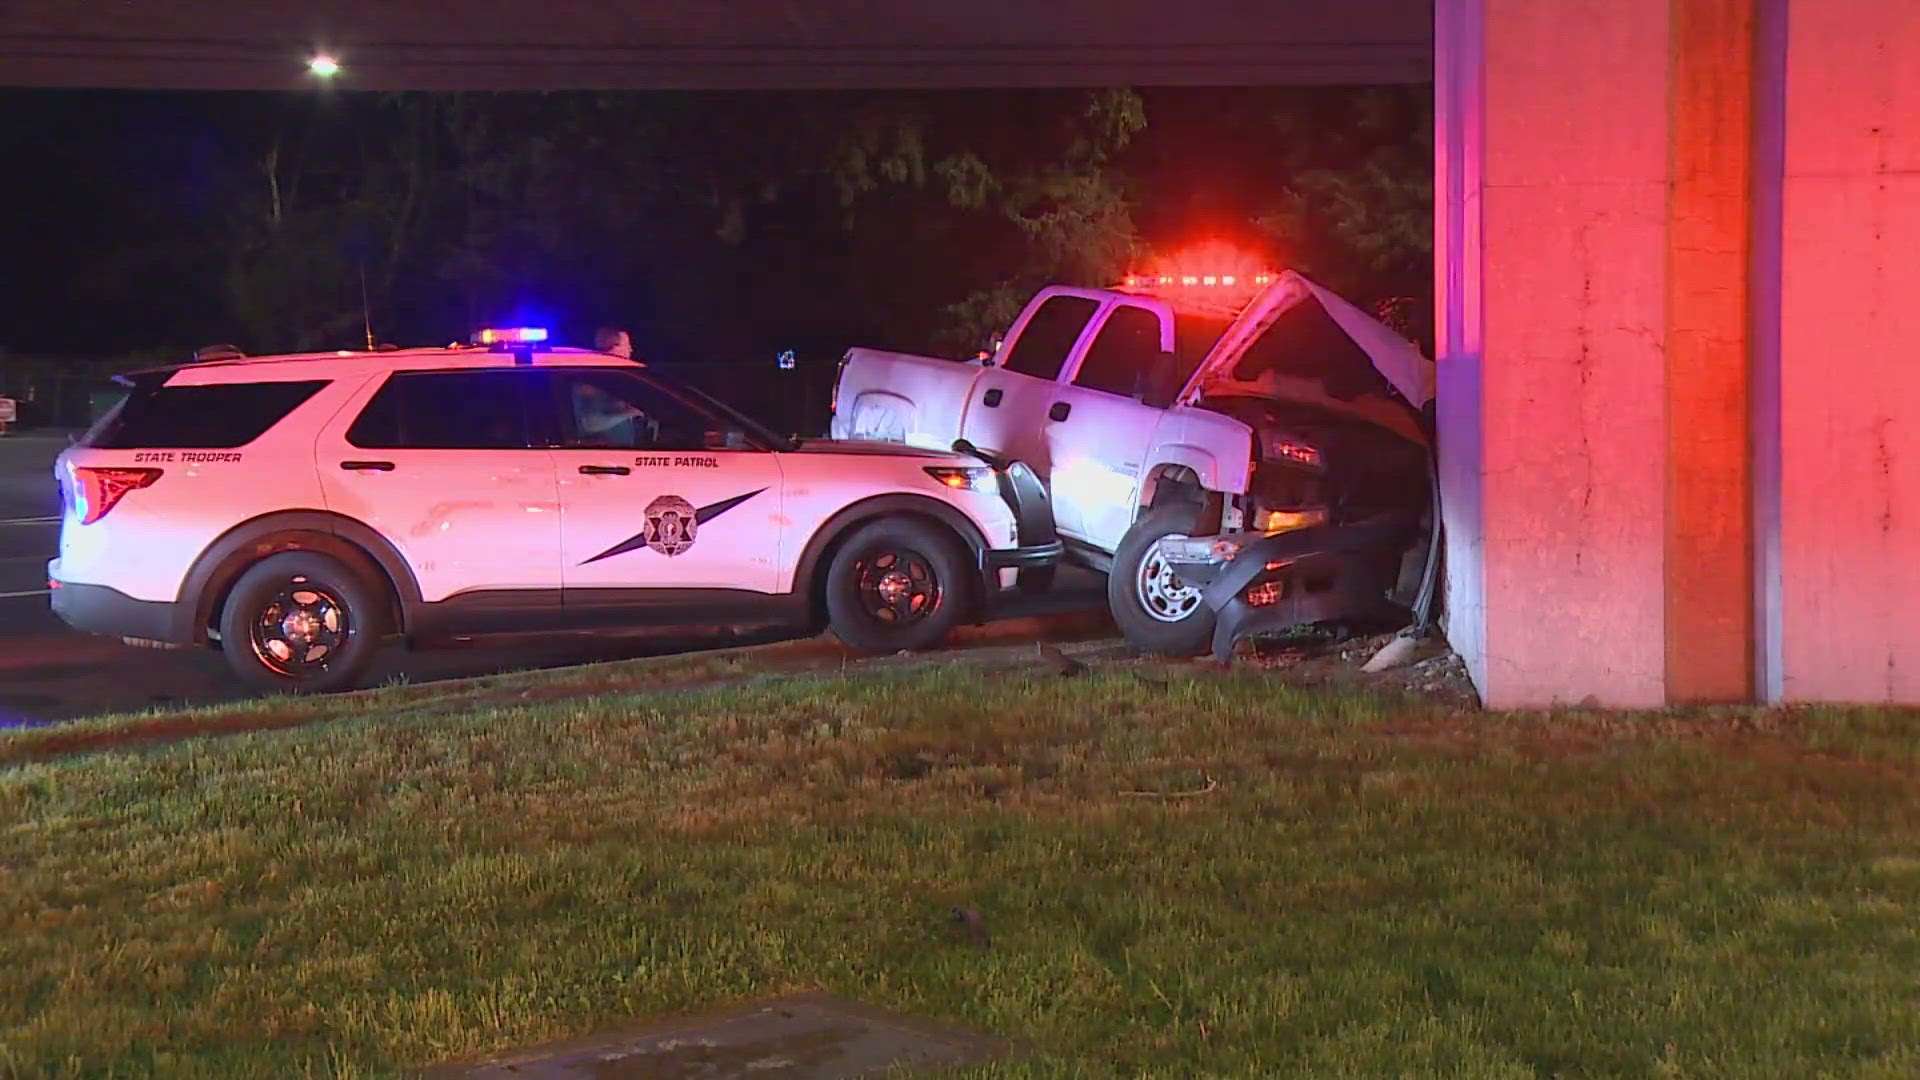 The chase of a stolen truck started in Snohomish County and ended in a crash near Sea-Tac Airport early Monday morning